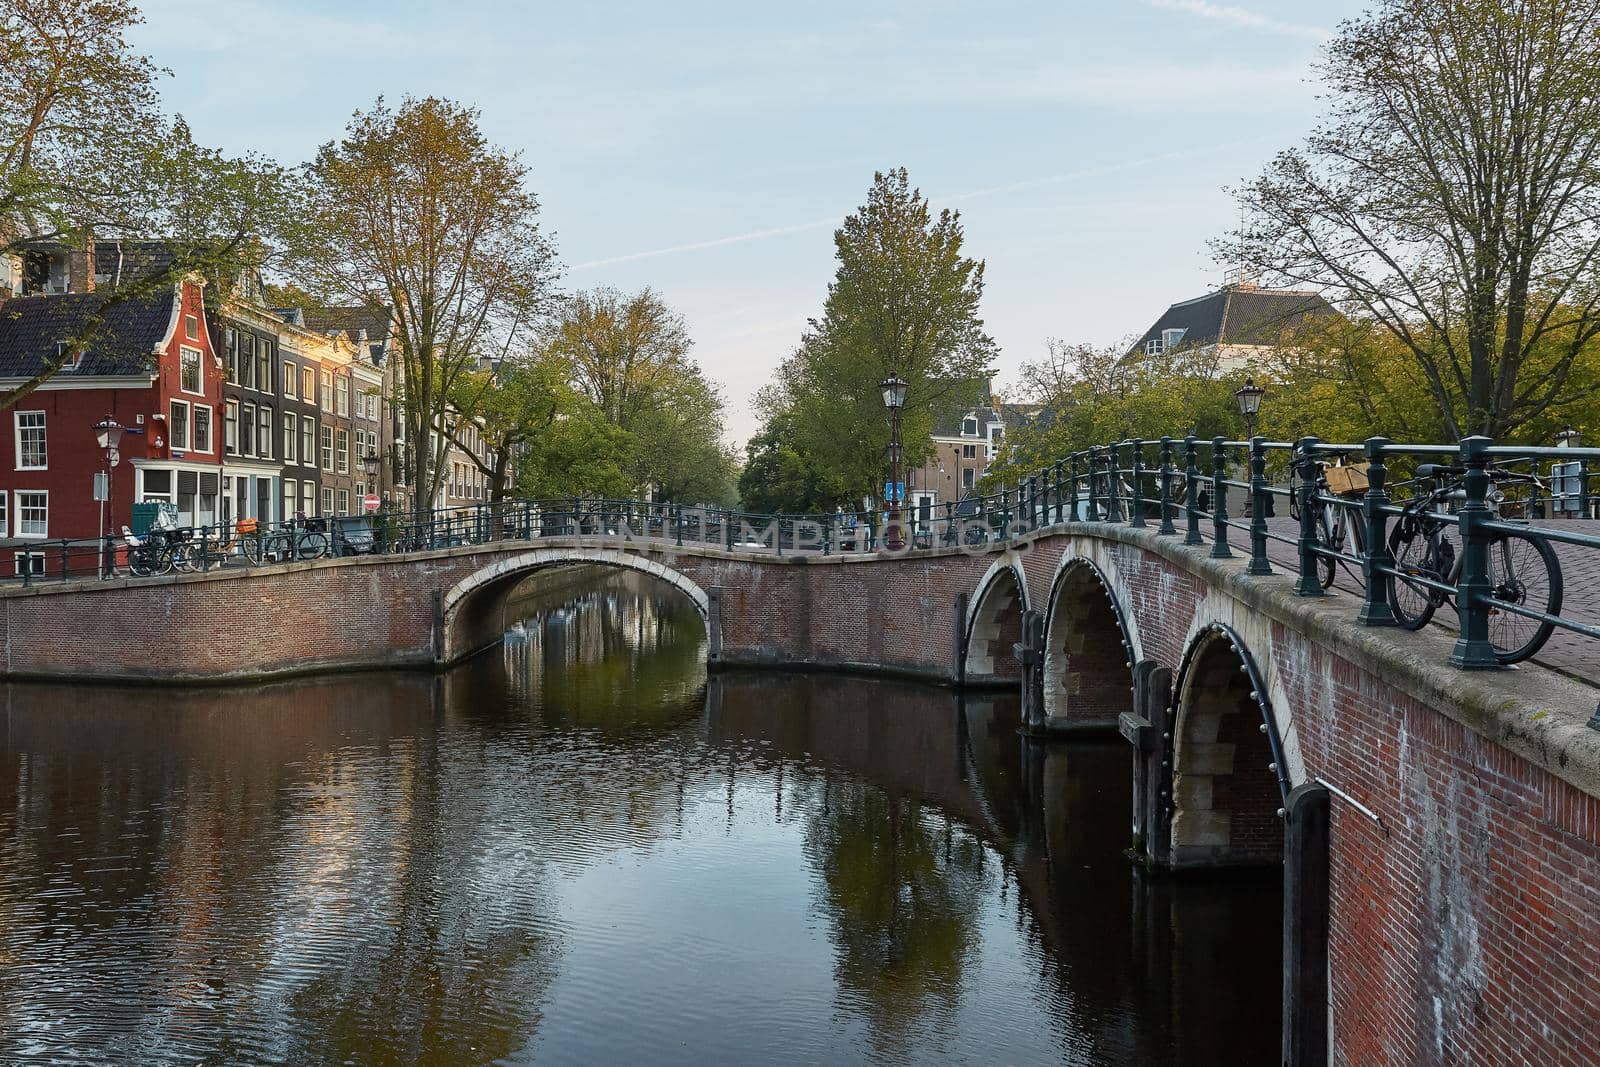 One of the many bridges over a canal in Amsterdam Netherlands.